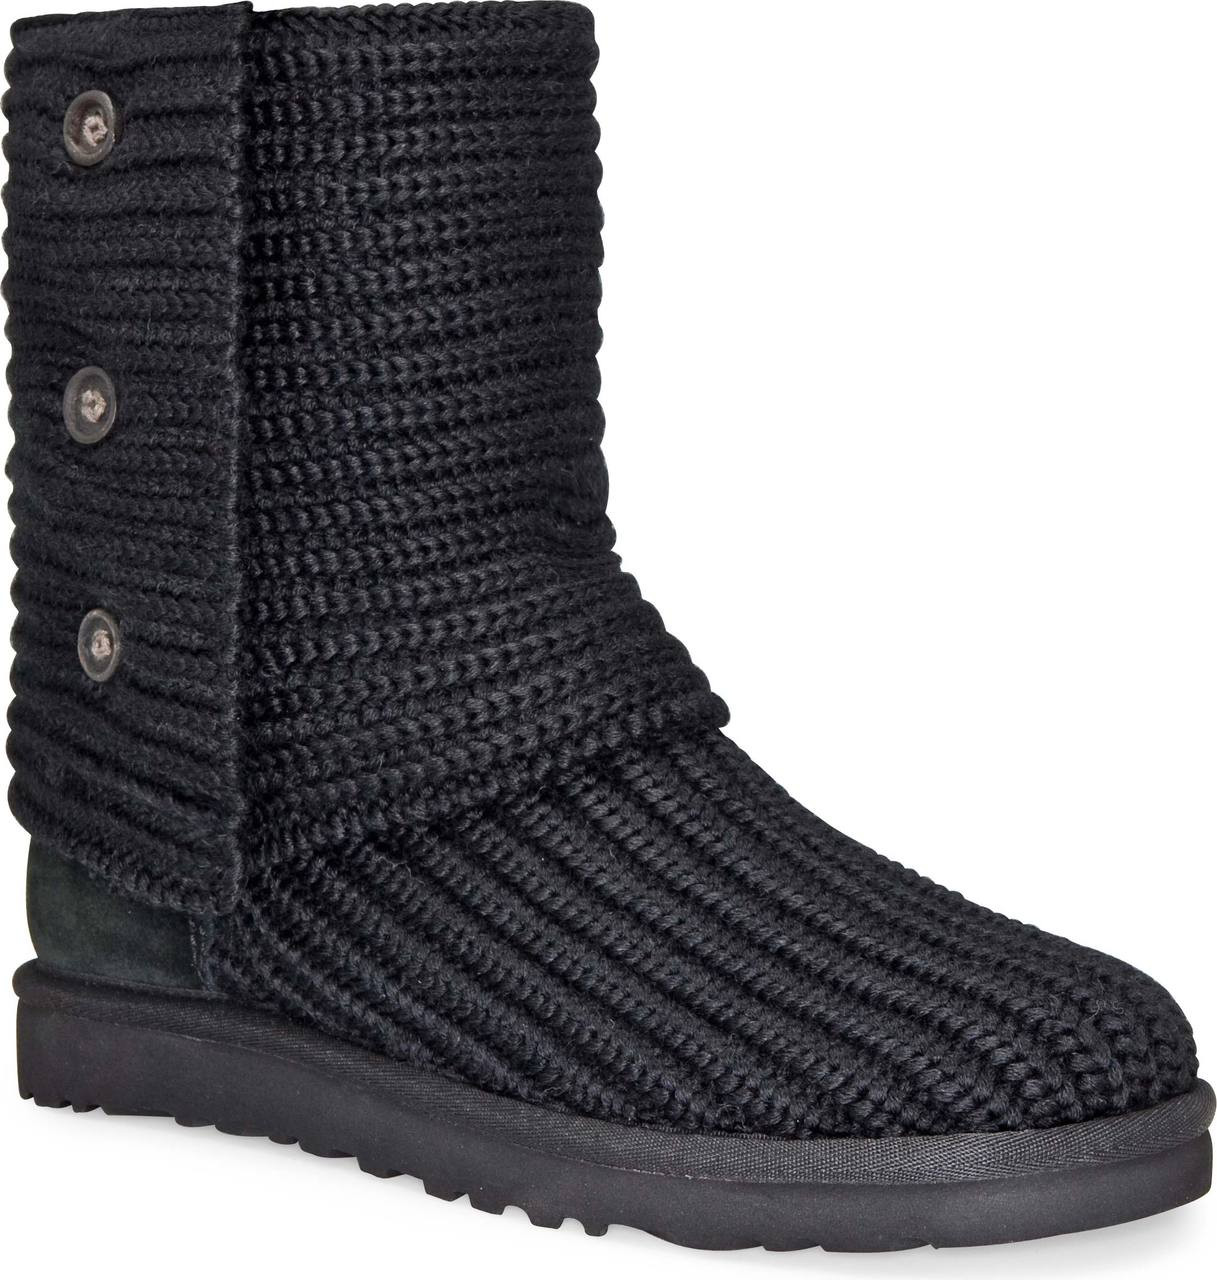 Uggs Boots Black Tall Sale Outlet